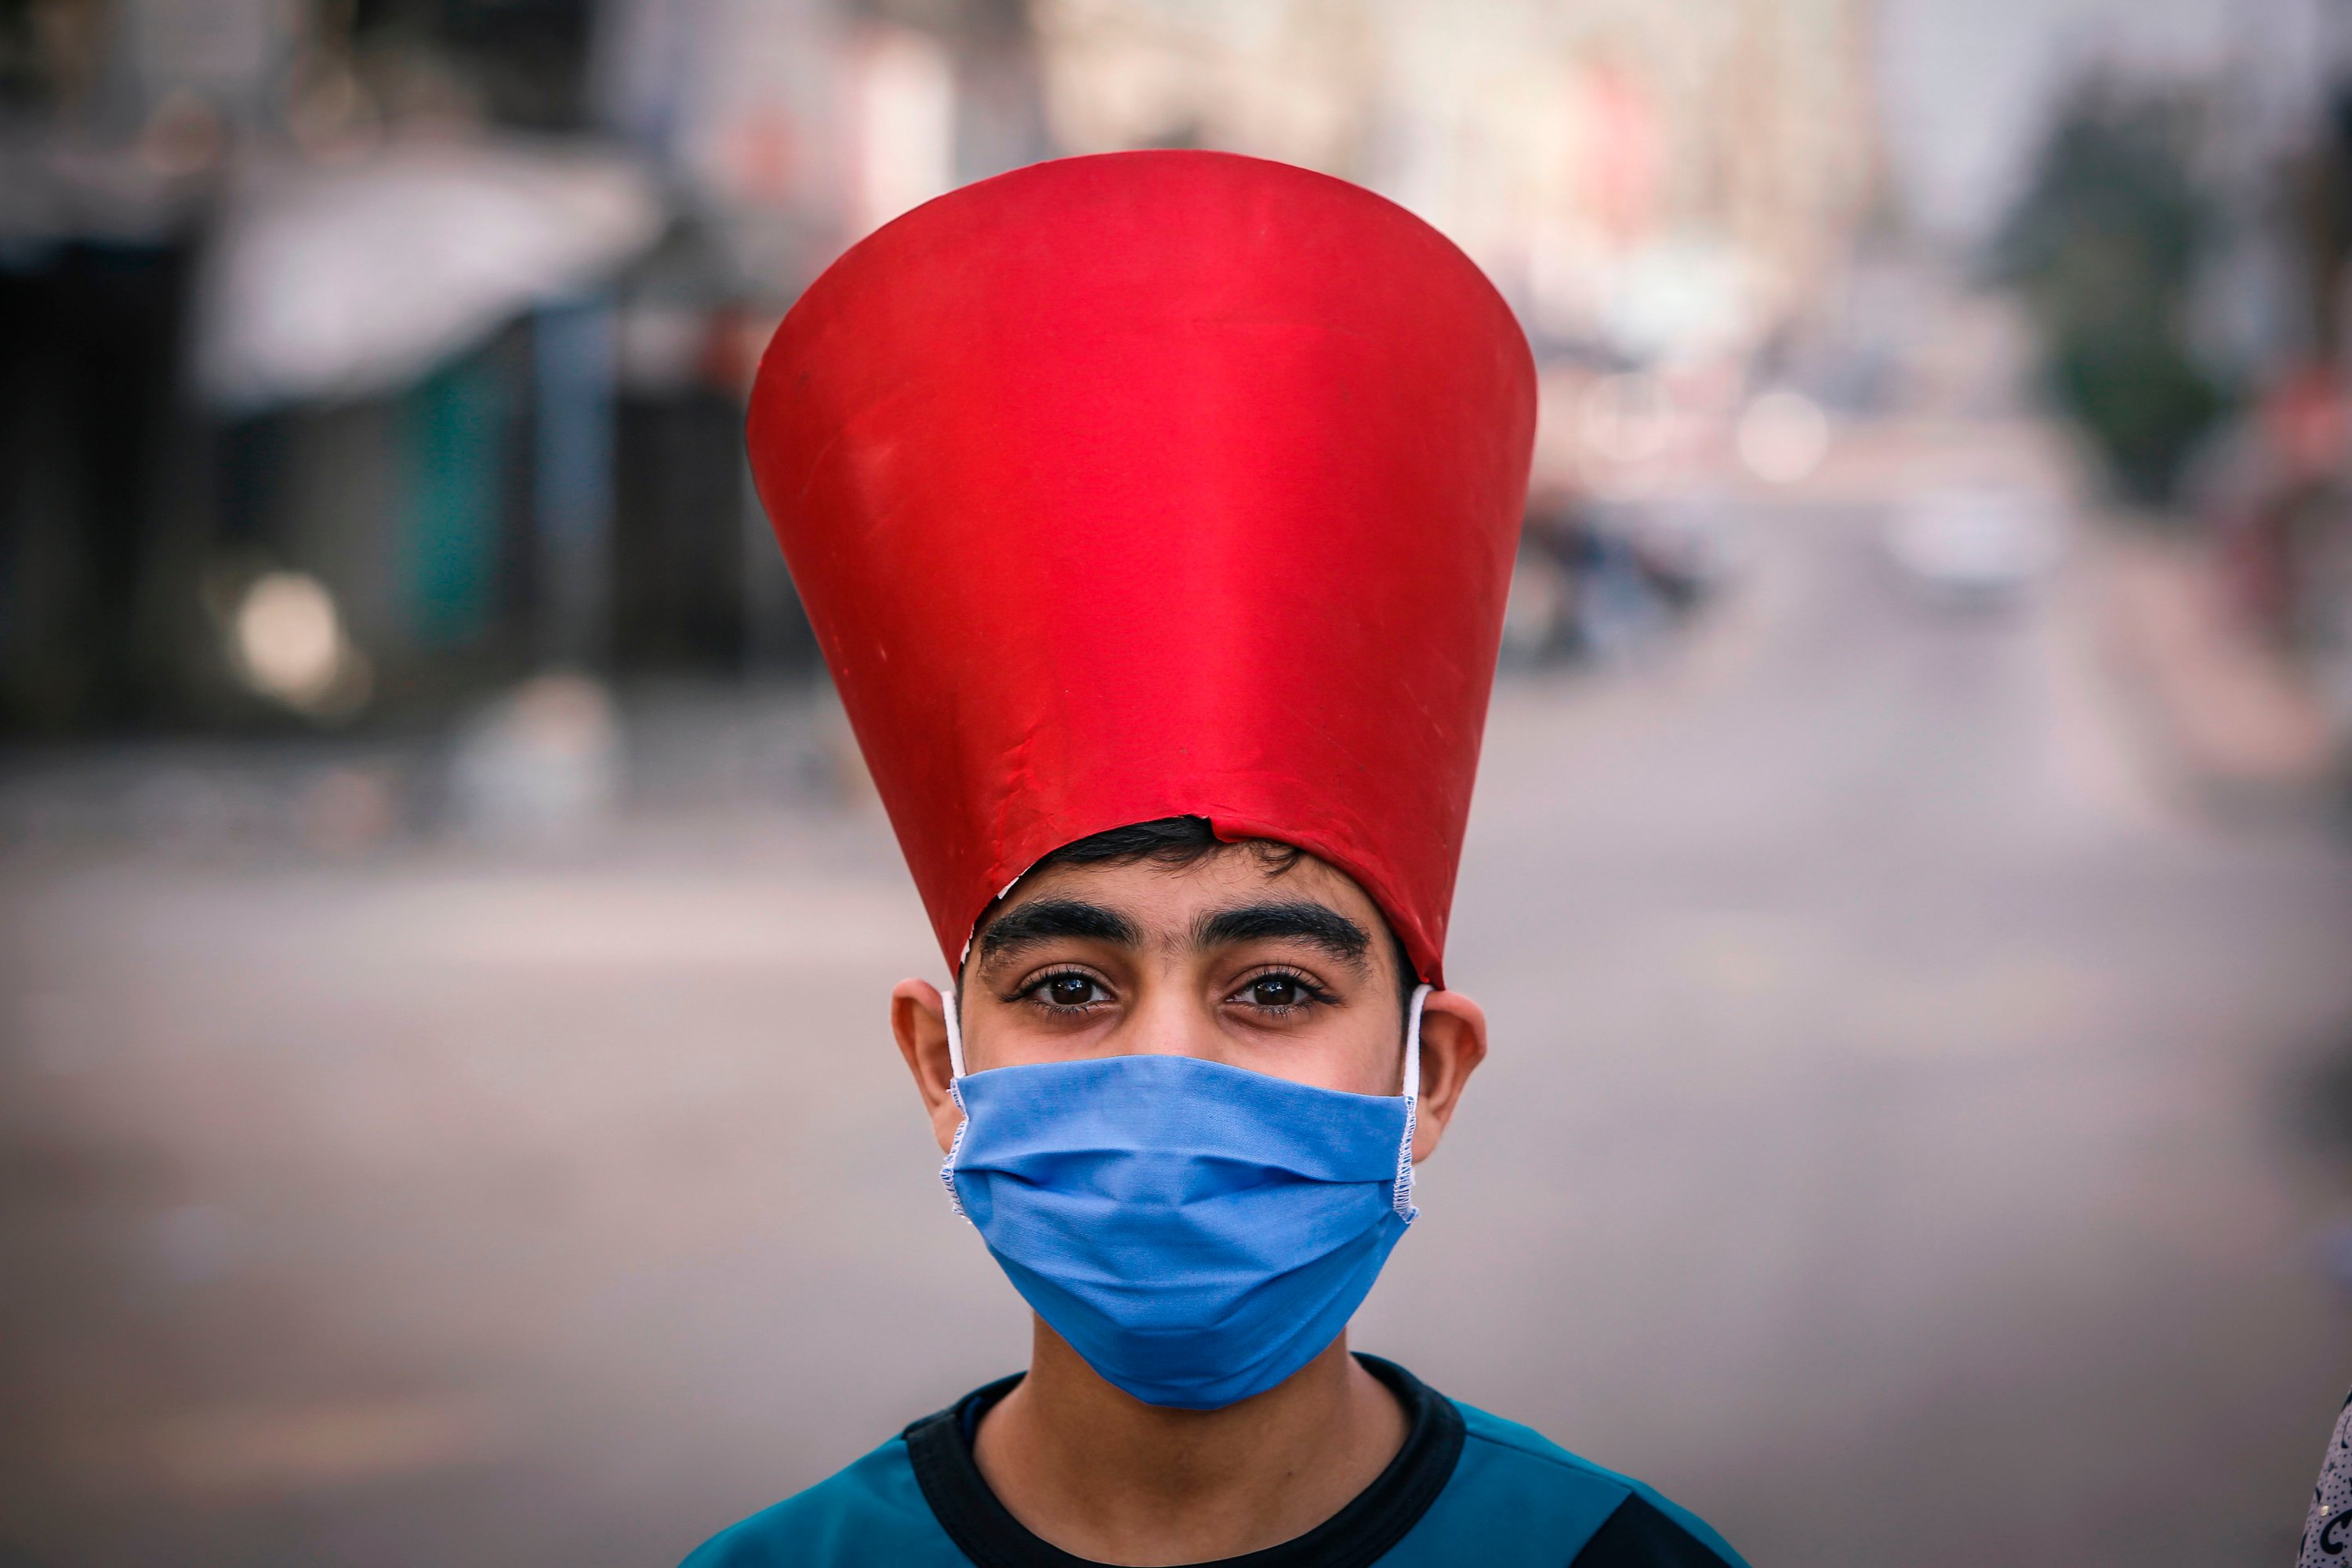 A Palestinian child wearing a paper hat and a mask due to the coronavirus pandemic walks along a street after performing prayers on the first day of Eid al-Fitr, Gaza City, May 24, 2020. (AFP Photo)